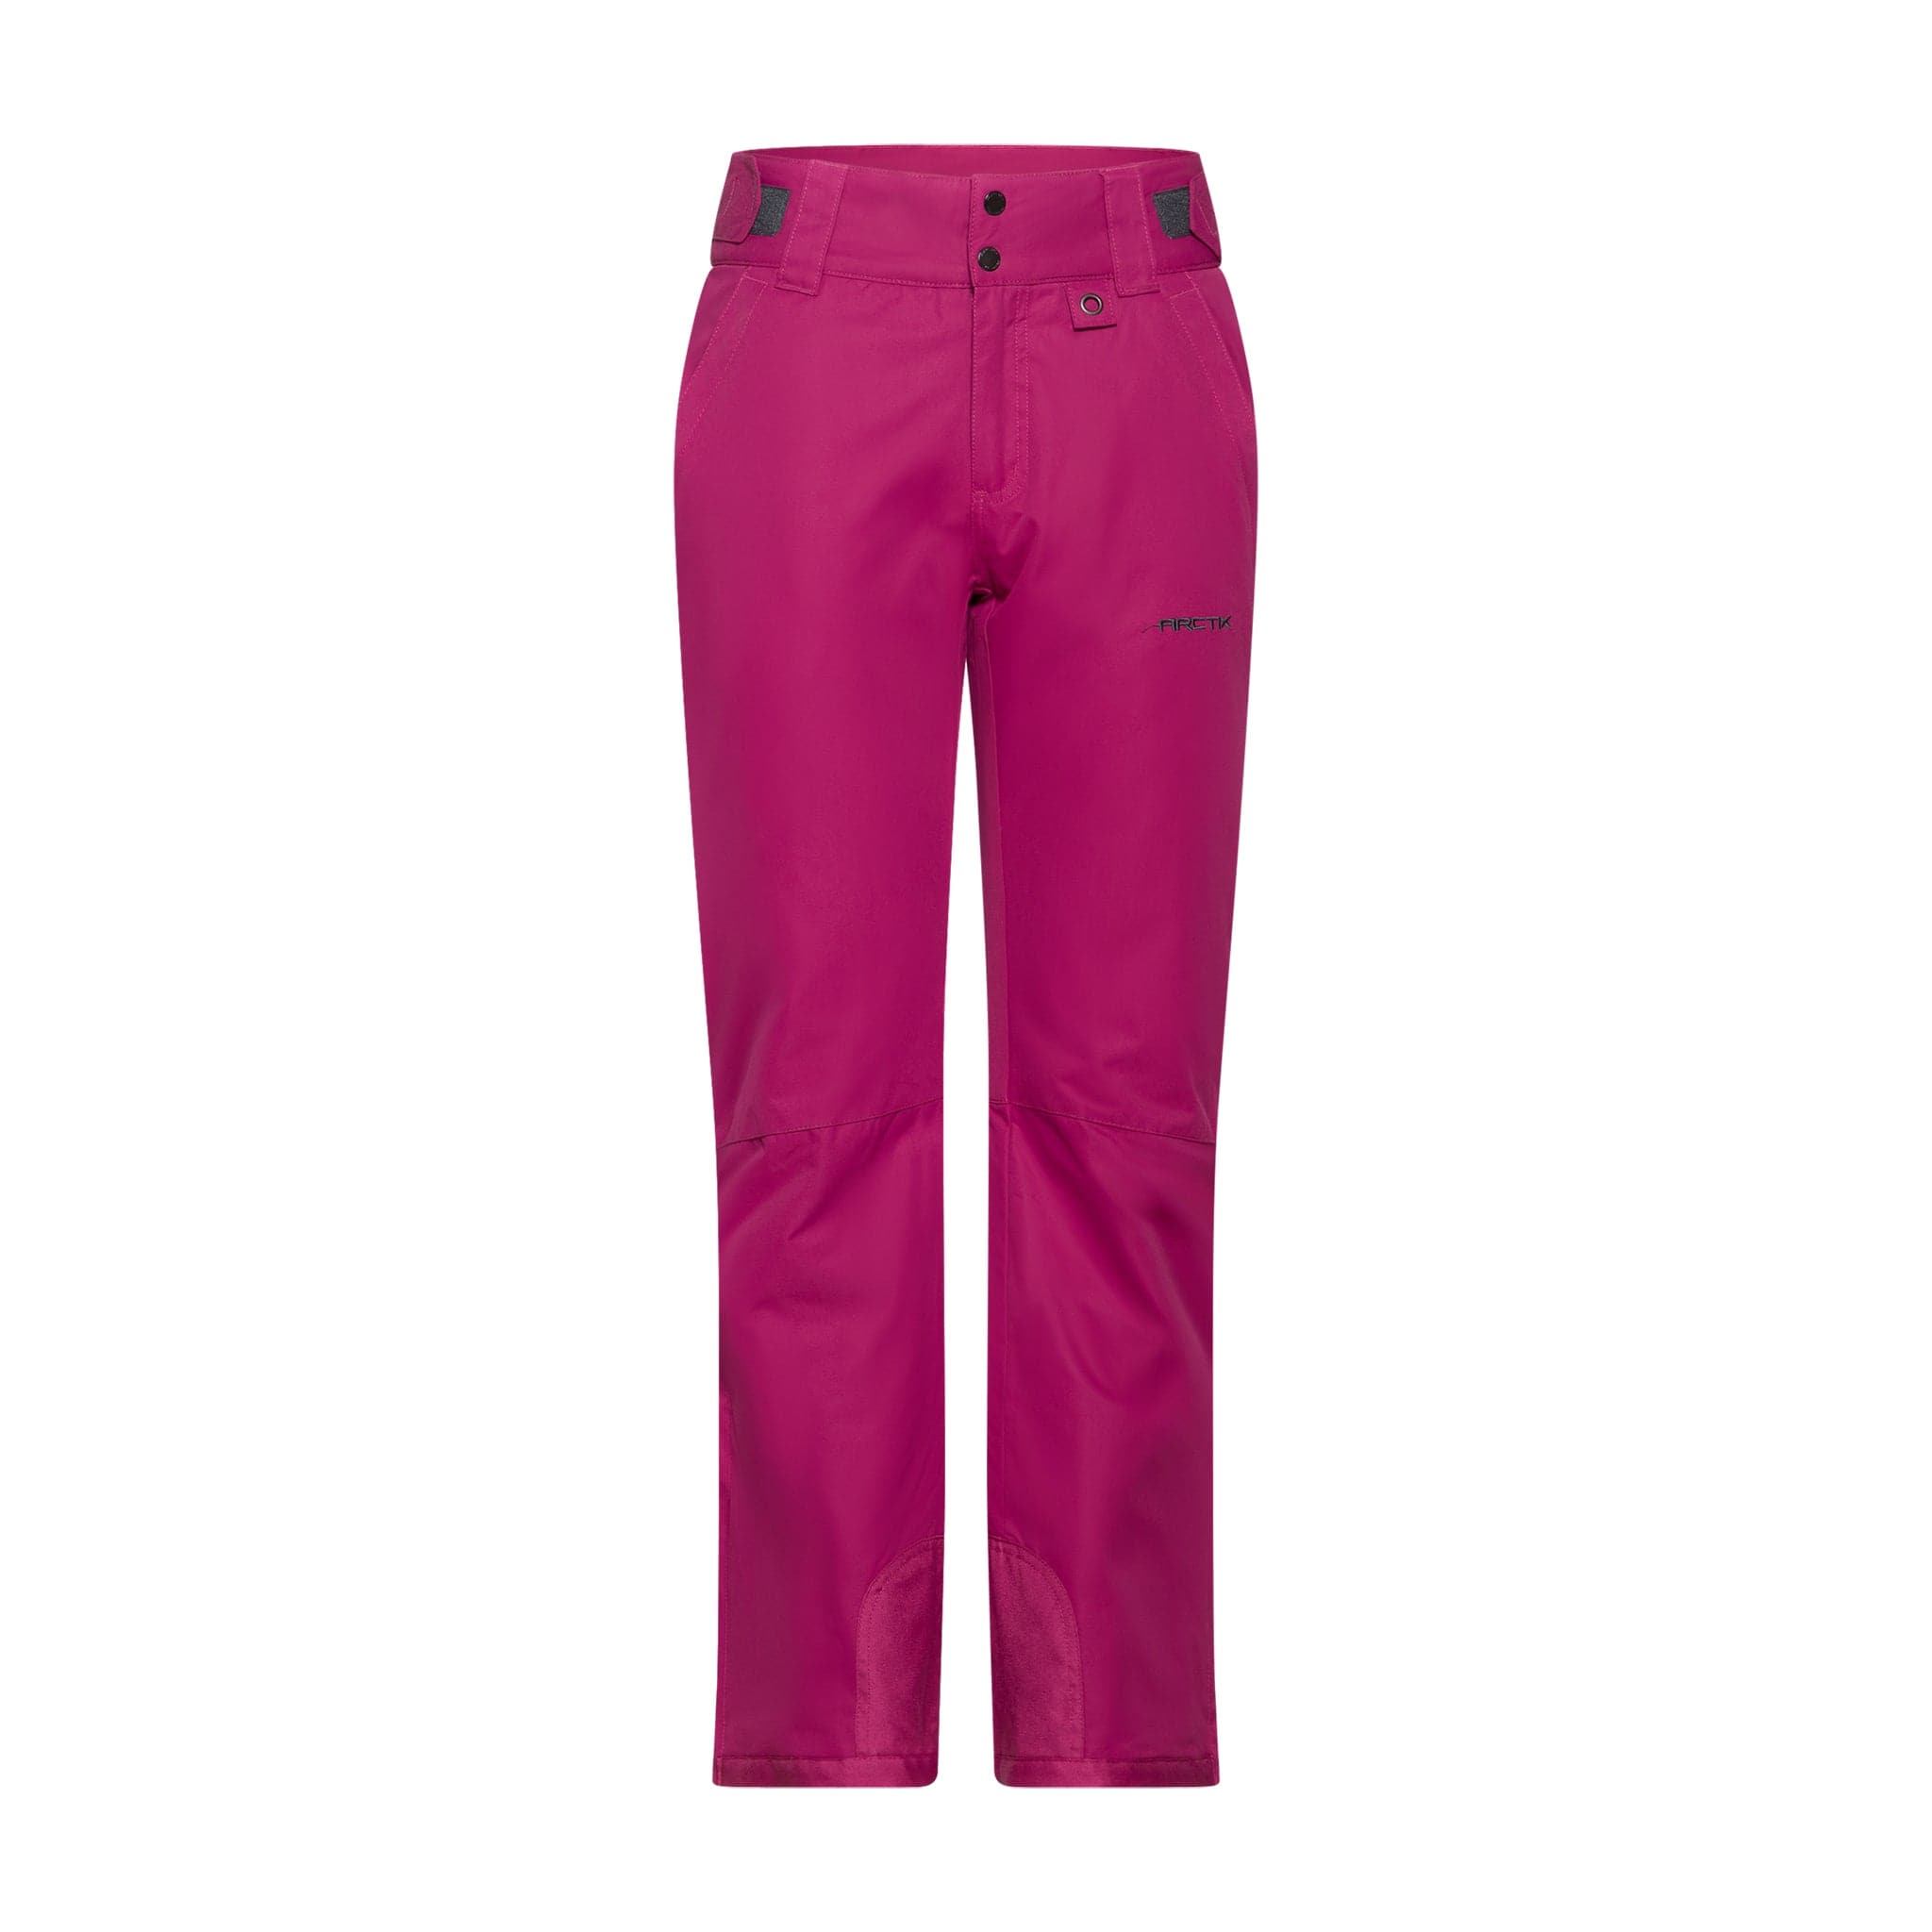 Women's Insulated Snow Pants - Long Inseam